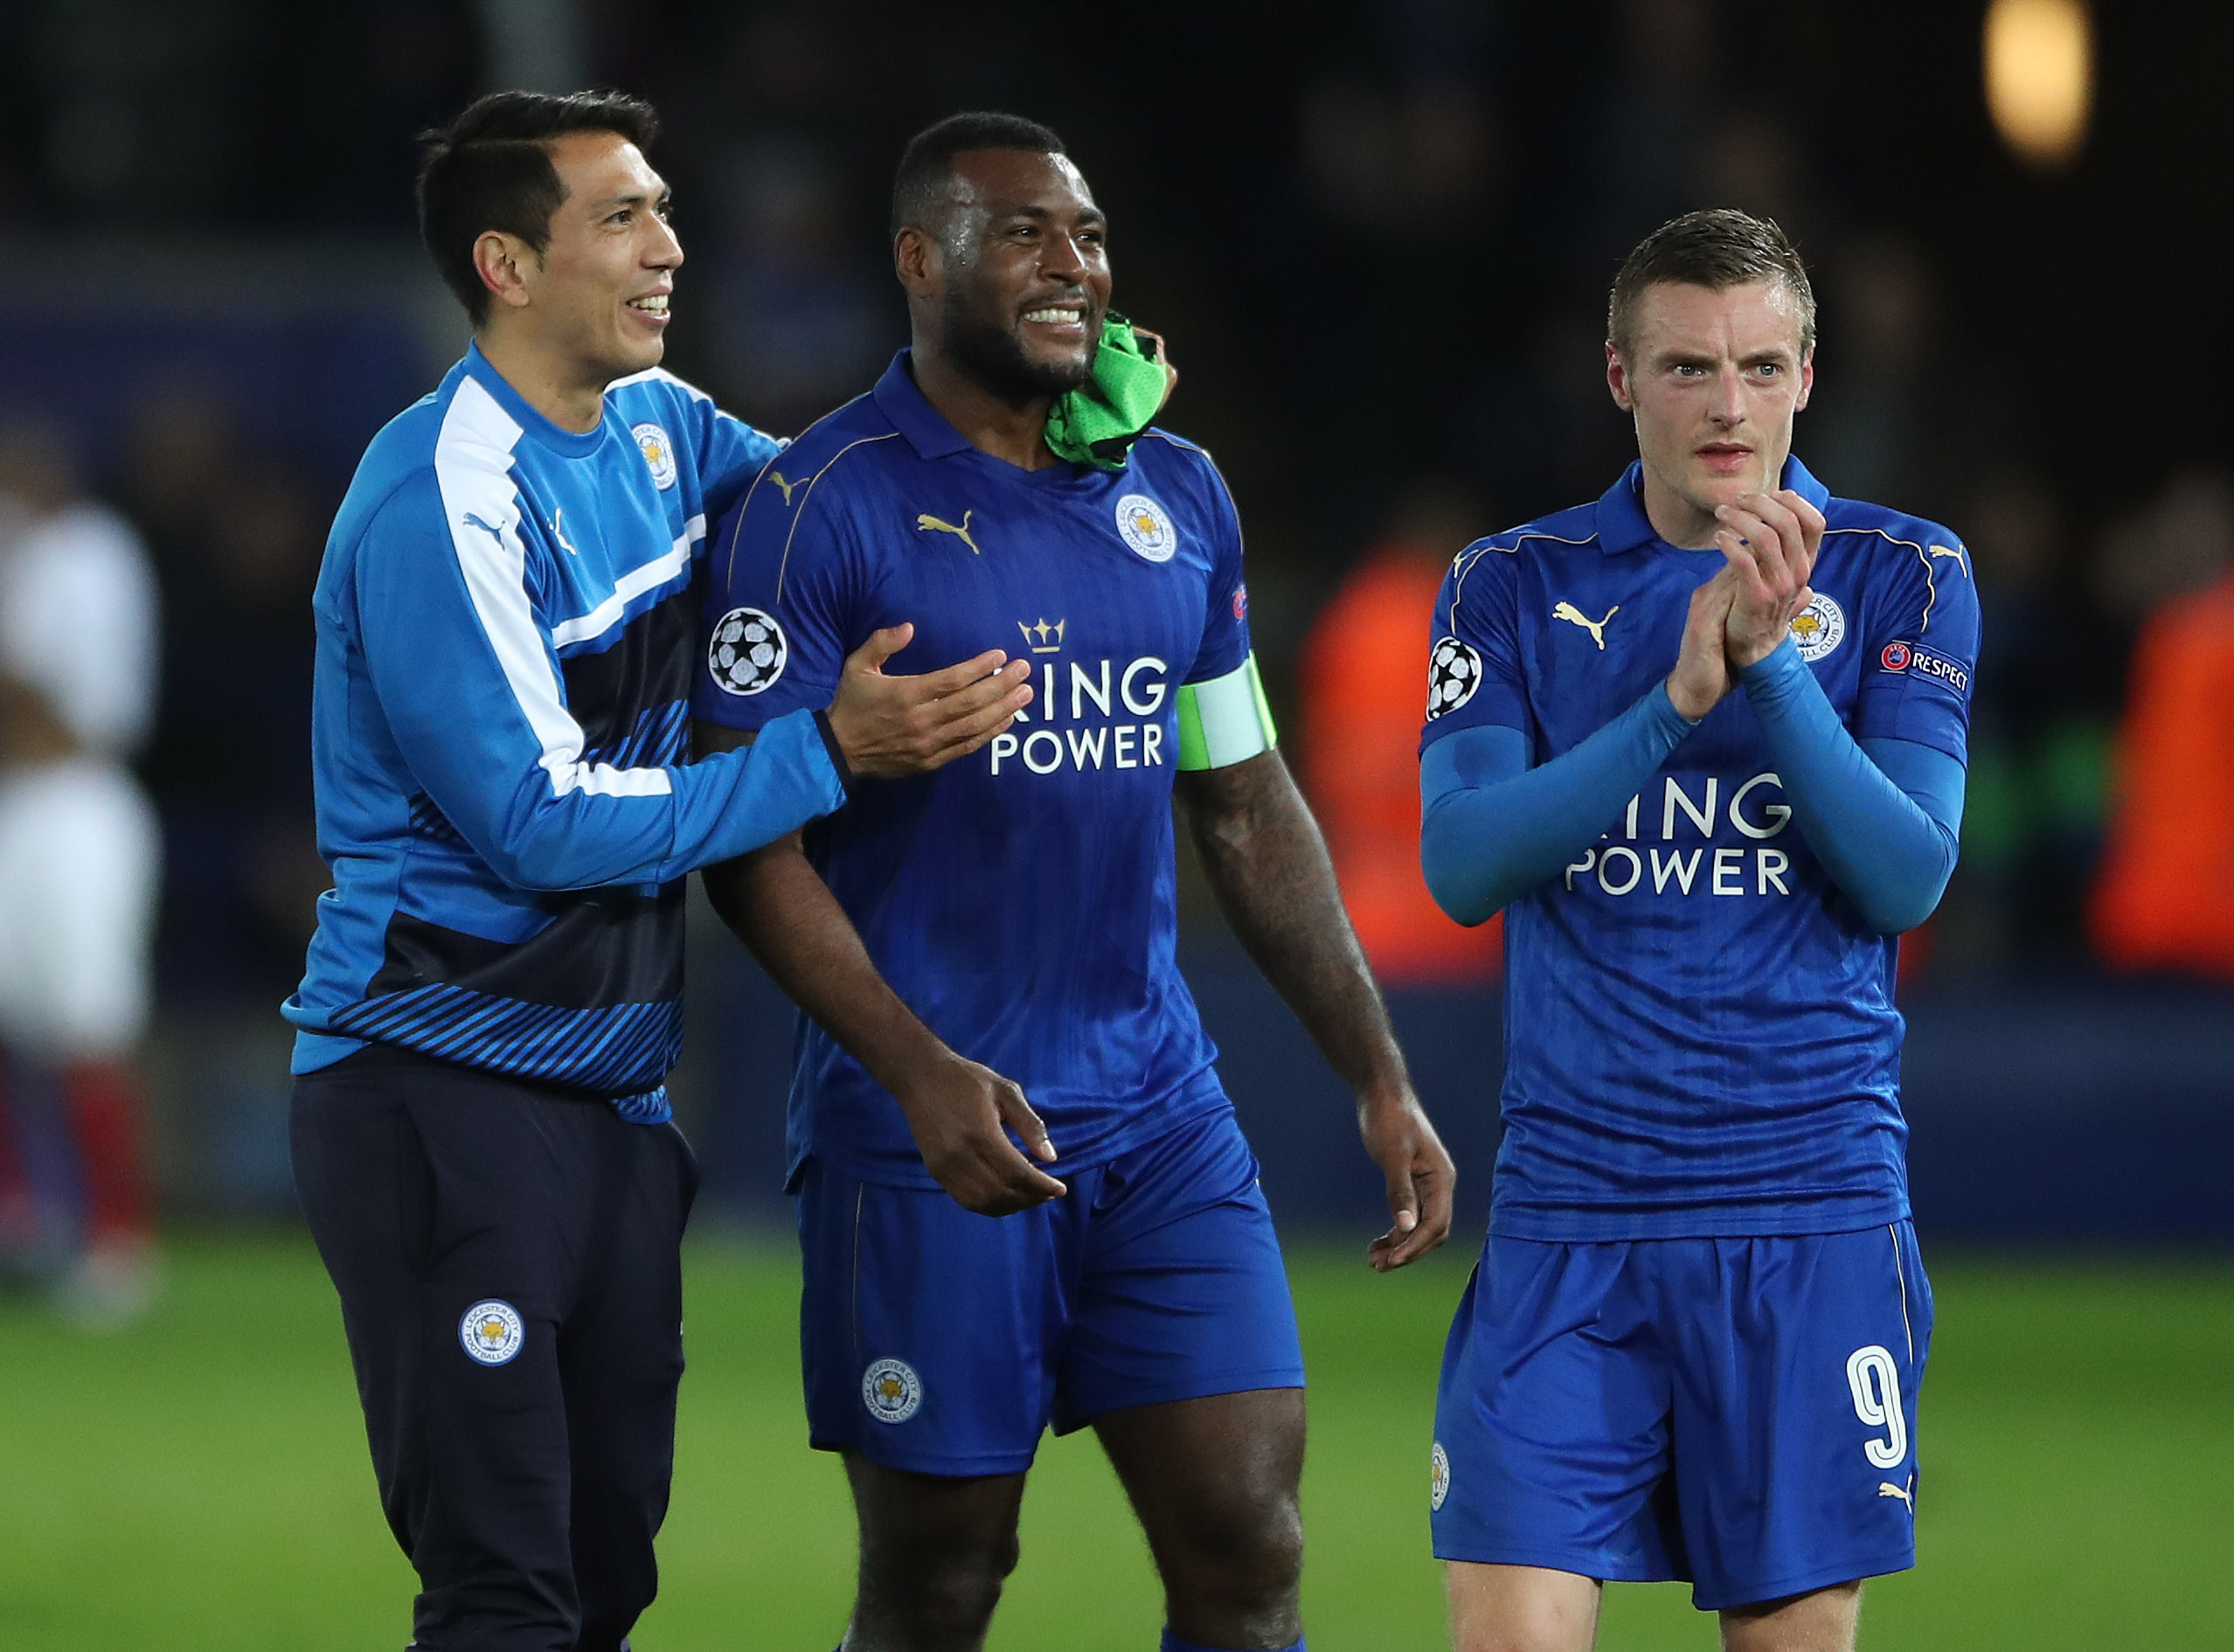 Leicester City's Leonardo Ulloa, Wes Morgan and Jamie Vardy celebrate after the final whistle during the UEFA Champions League, Round of 16, Second Leg match at the King Power Stadium, Leicester. (PA)